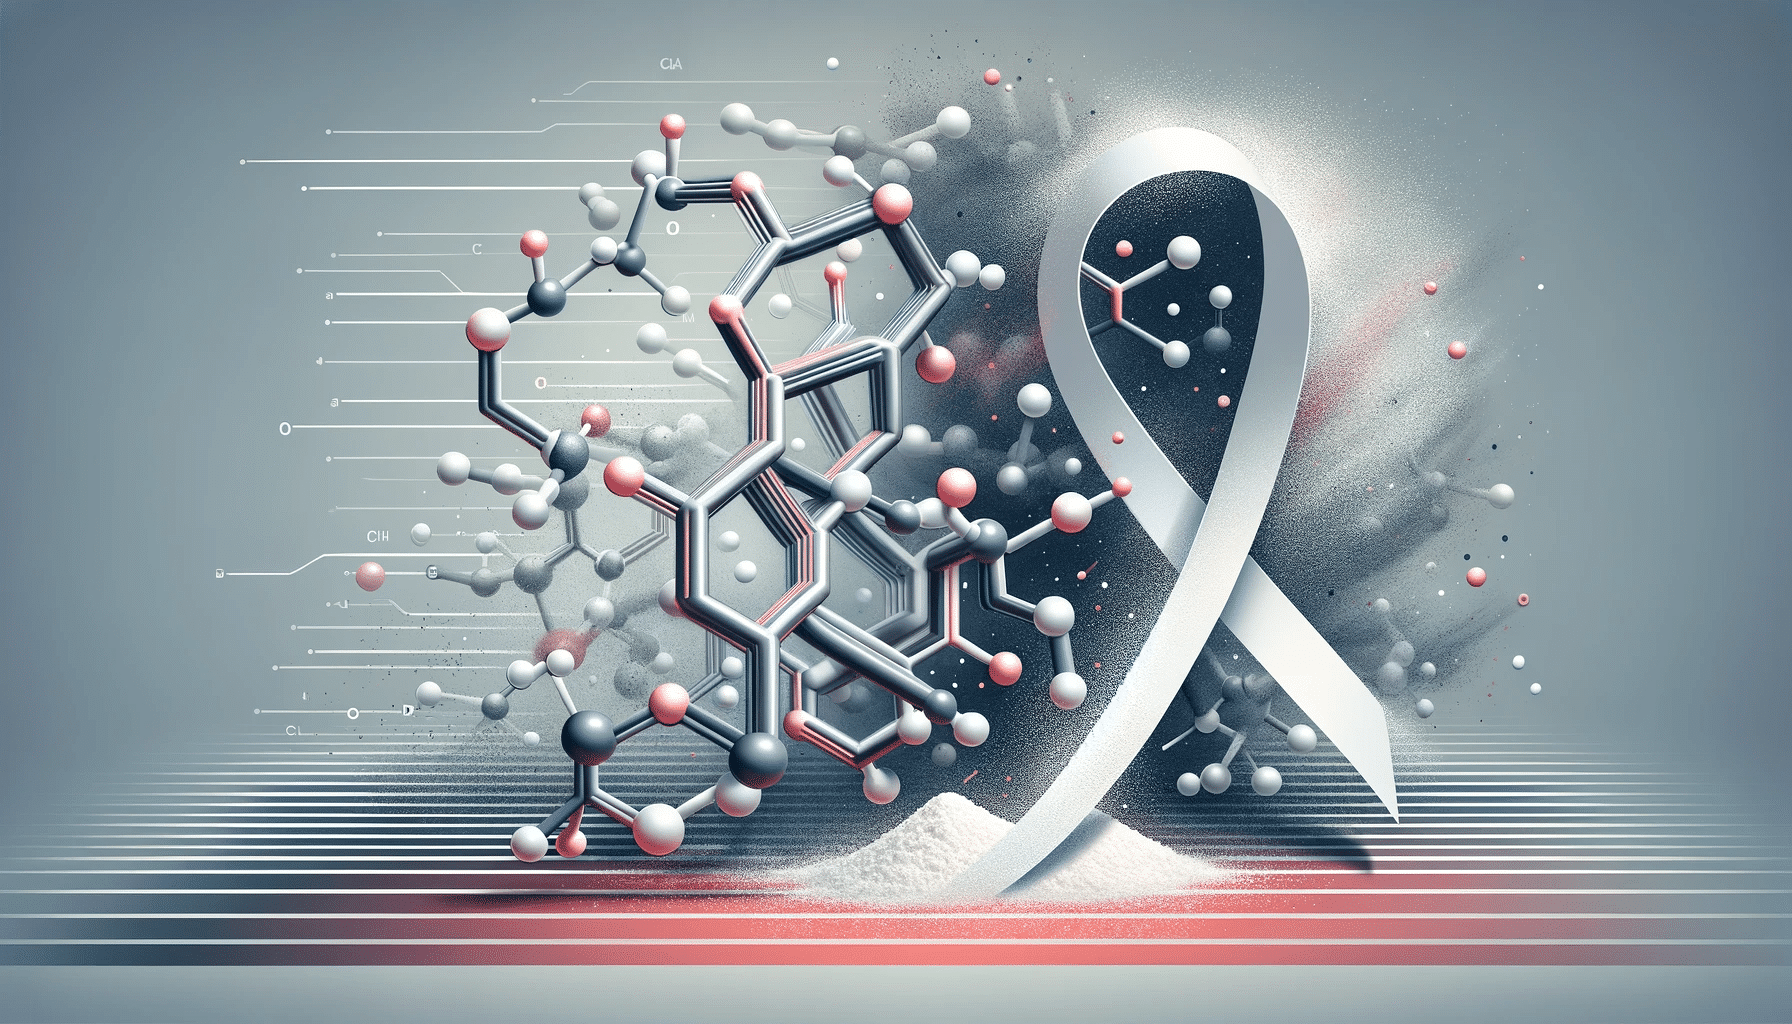 Horizontal image with a modern and impactful theme of Aspartame Causes Cancer. The image includes a stylized representation of the molecular structu